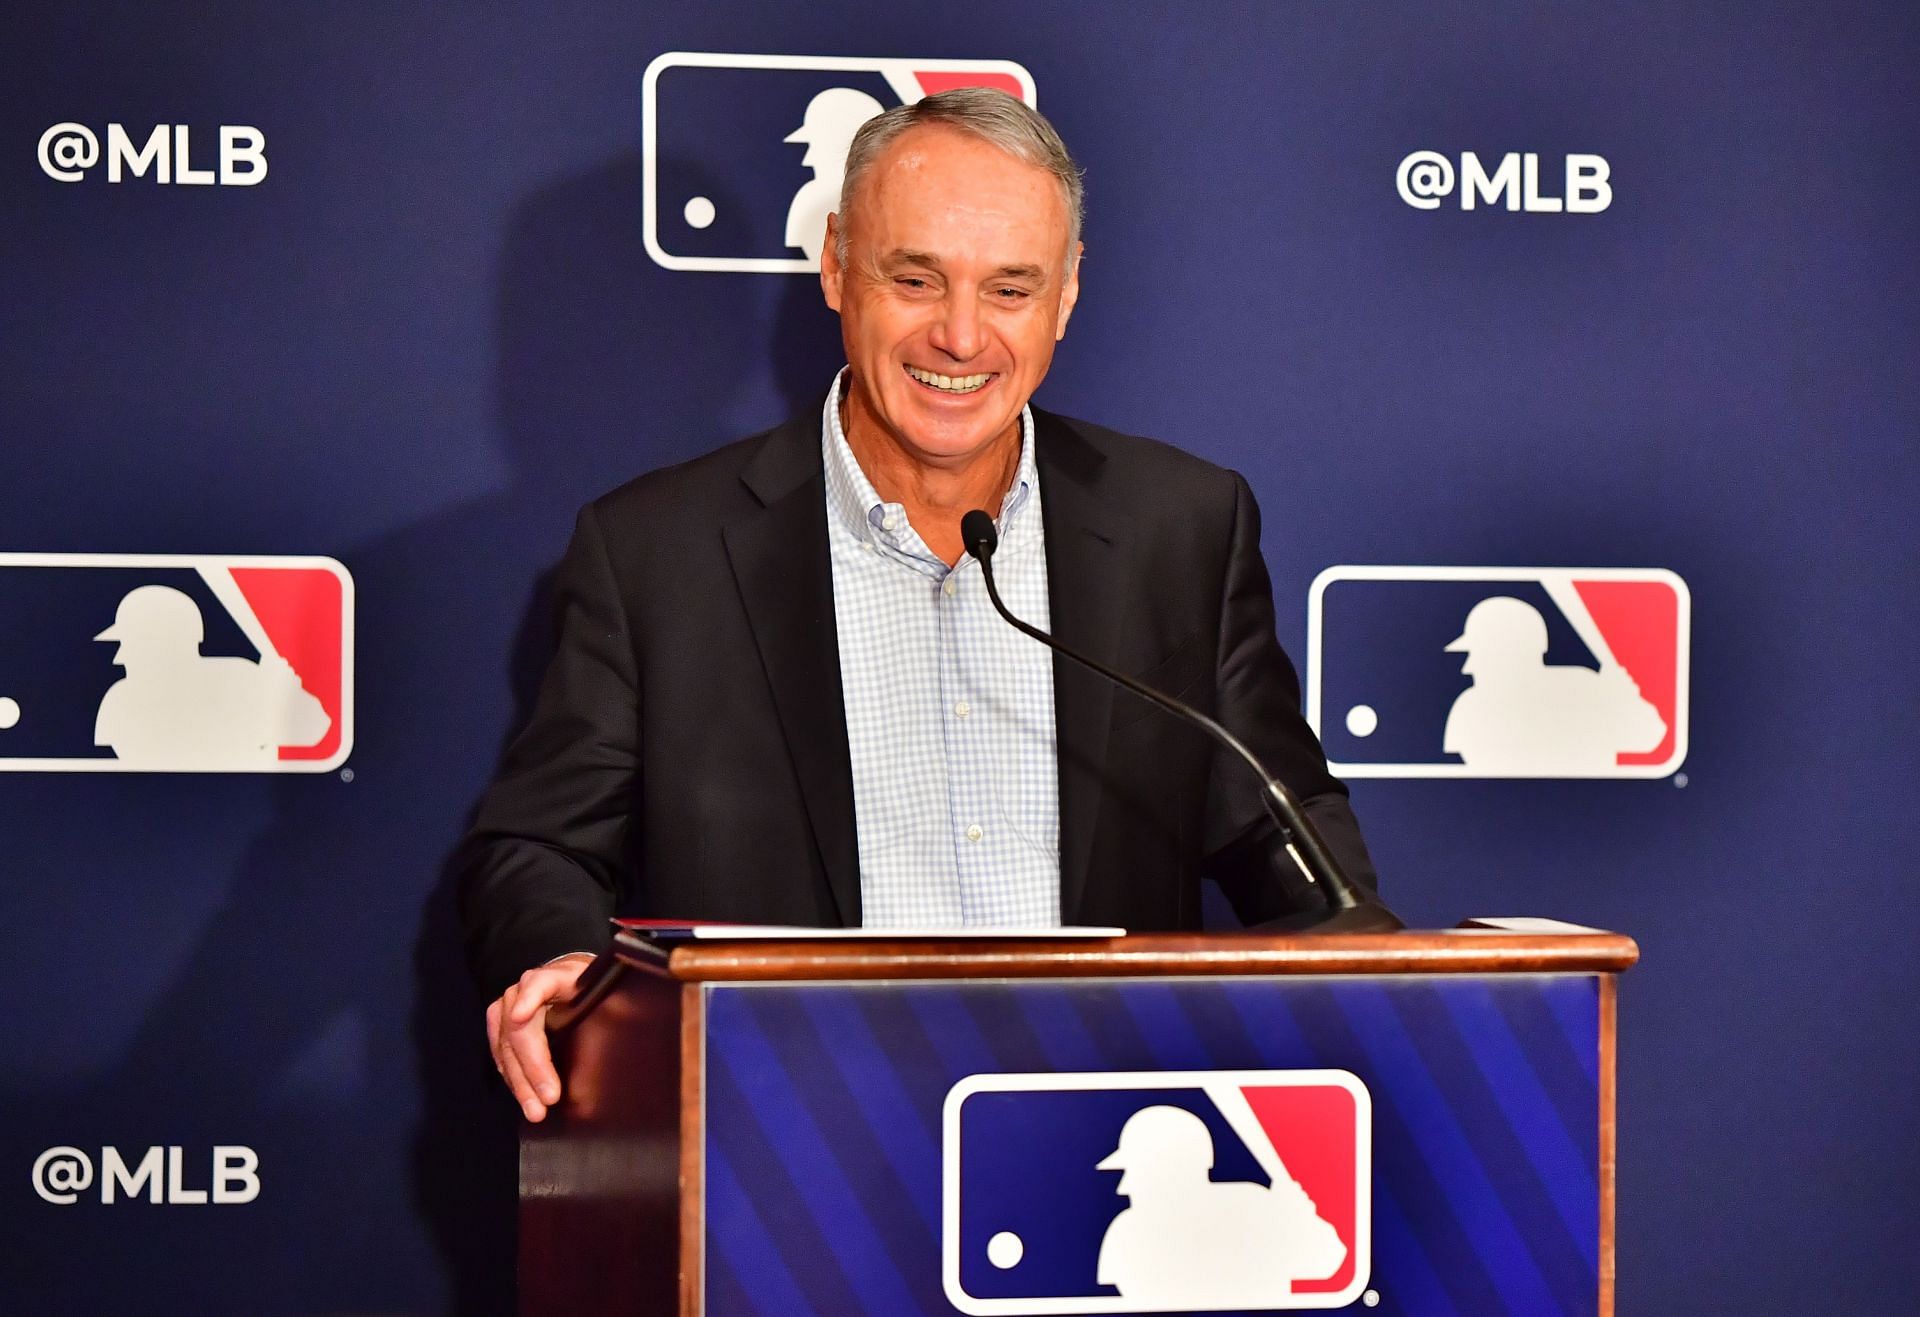 MLB Top man, Rob Manfred sent out a gift to players that is being dismissed as &quot;tokenism&quot;